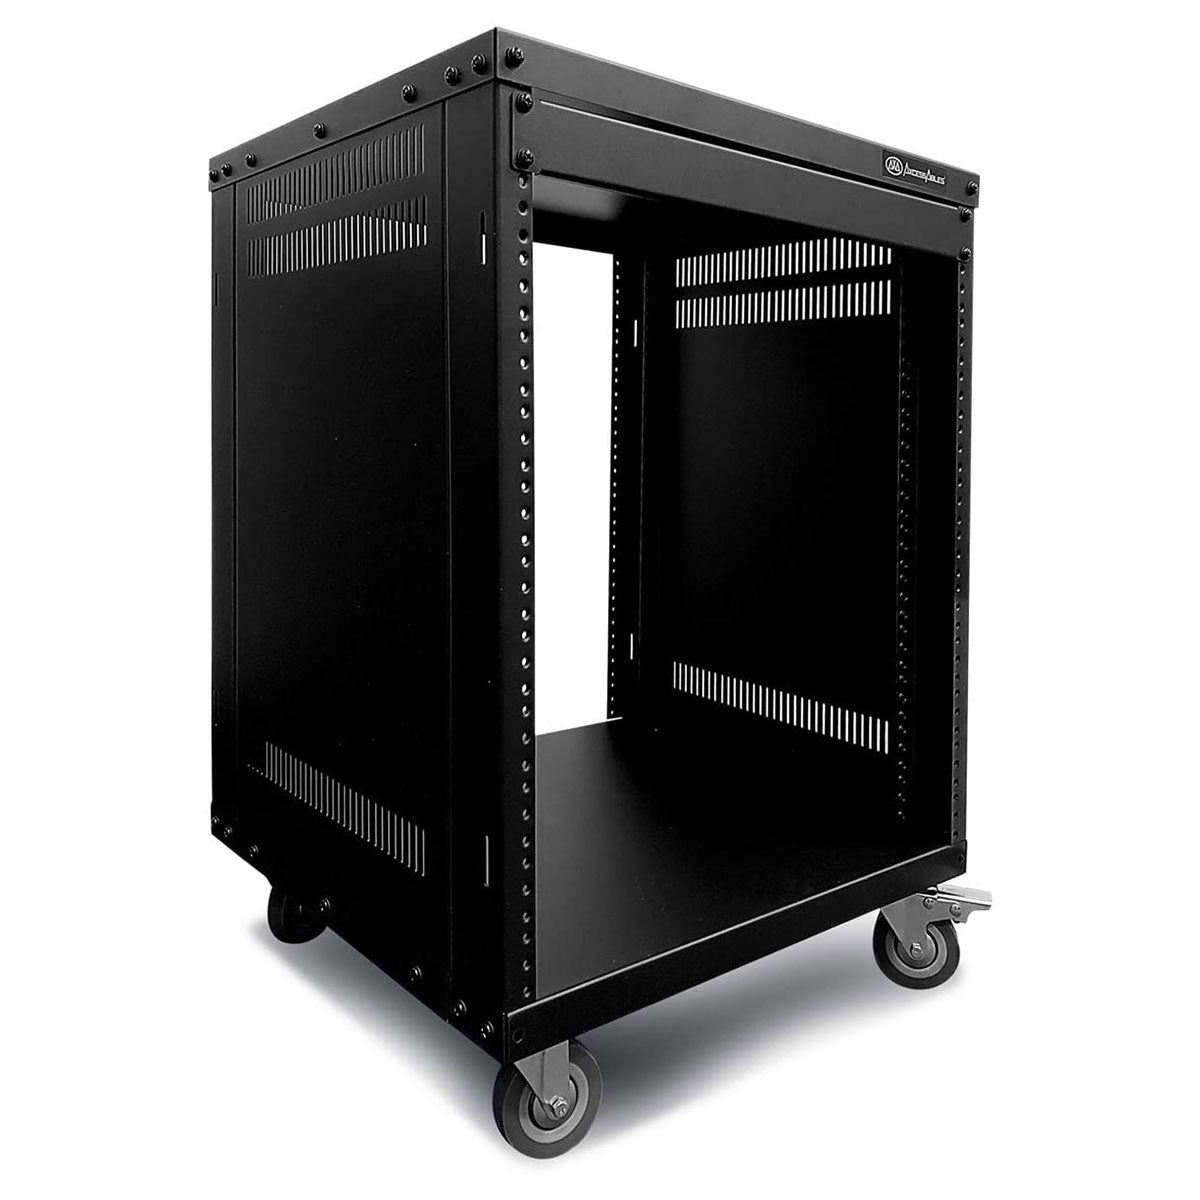 AxcessAbles 12U AV Rack Stand | 12 Space Component Rack Cabinet | Removable Side Panels for Open-Frame | 550lb Capacity Four Post Network Server Case| 19-Inch Rack-mountable Cabinet (RK12U)